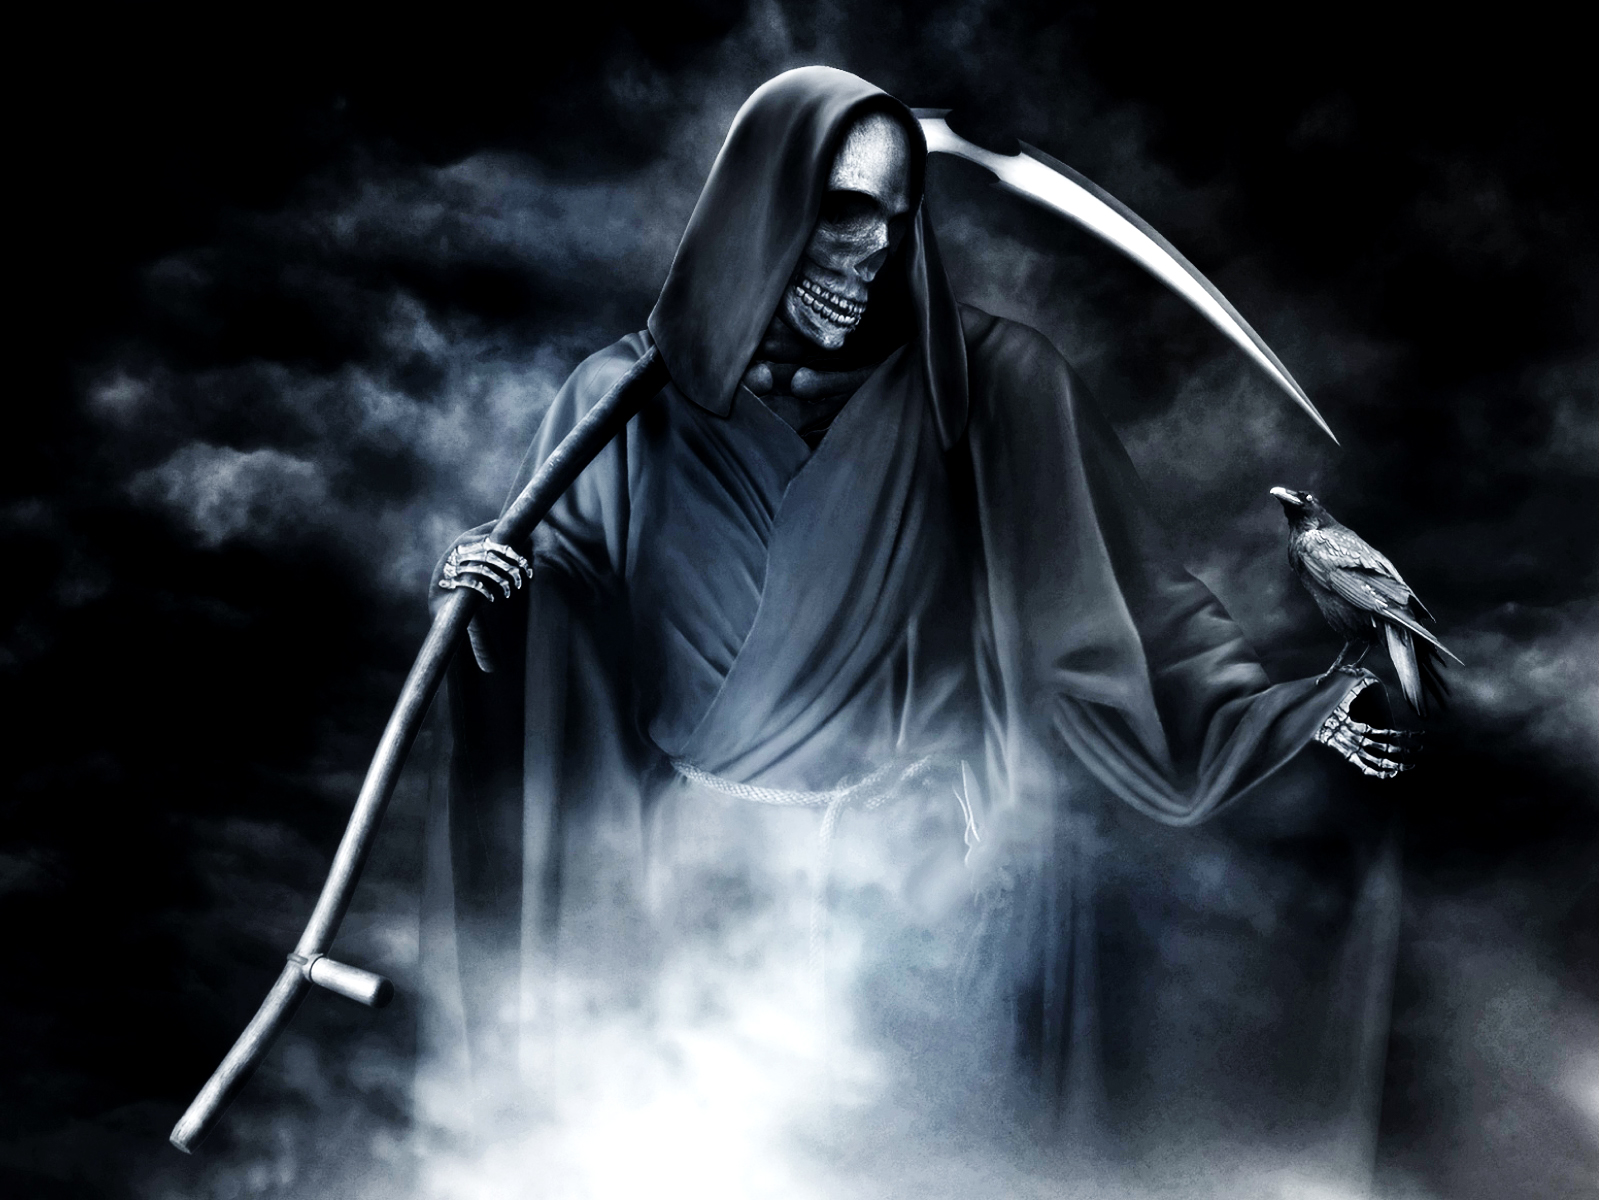 grim reaper live wallpapers,darkness,cg artwork,fictional character,ghost,illustration